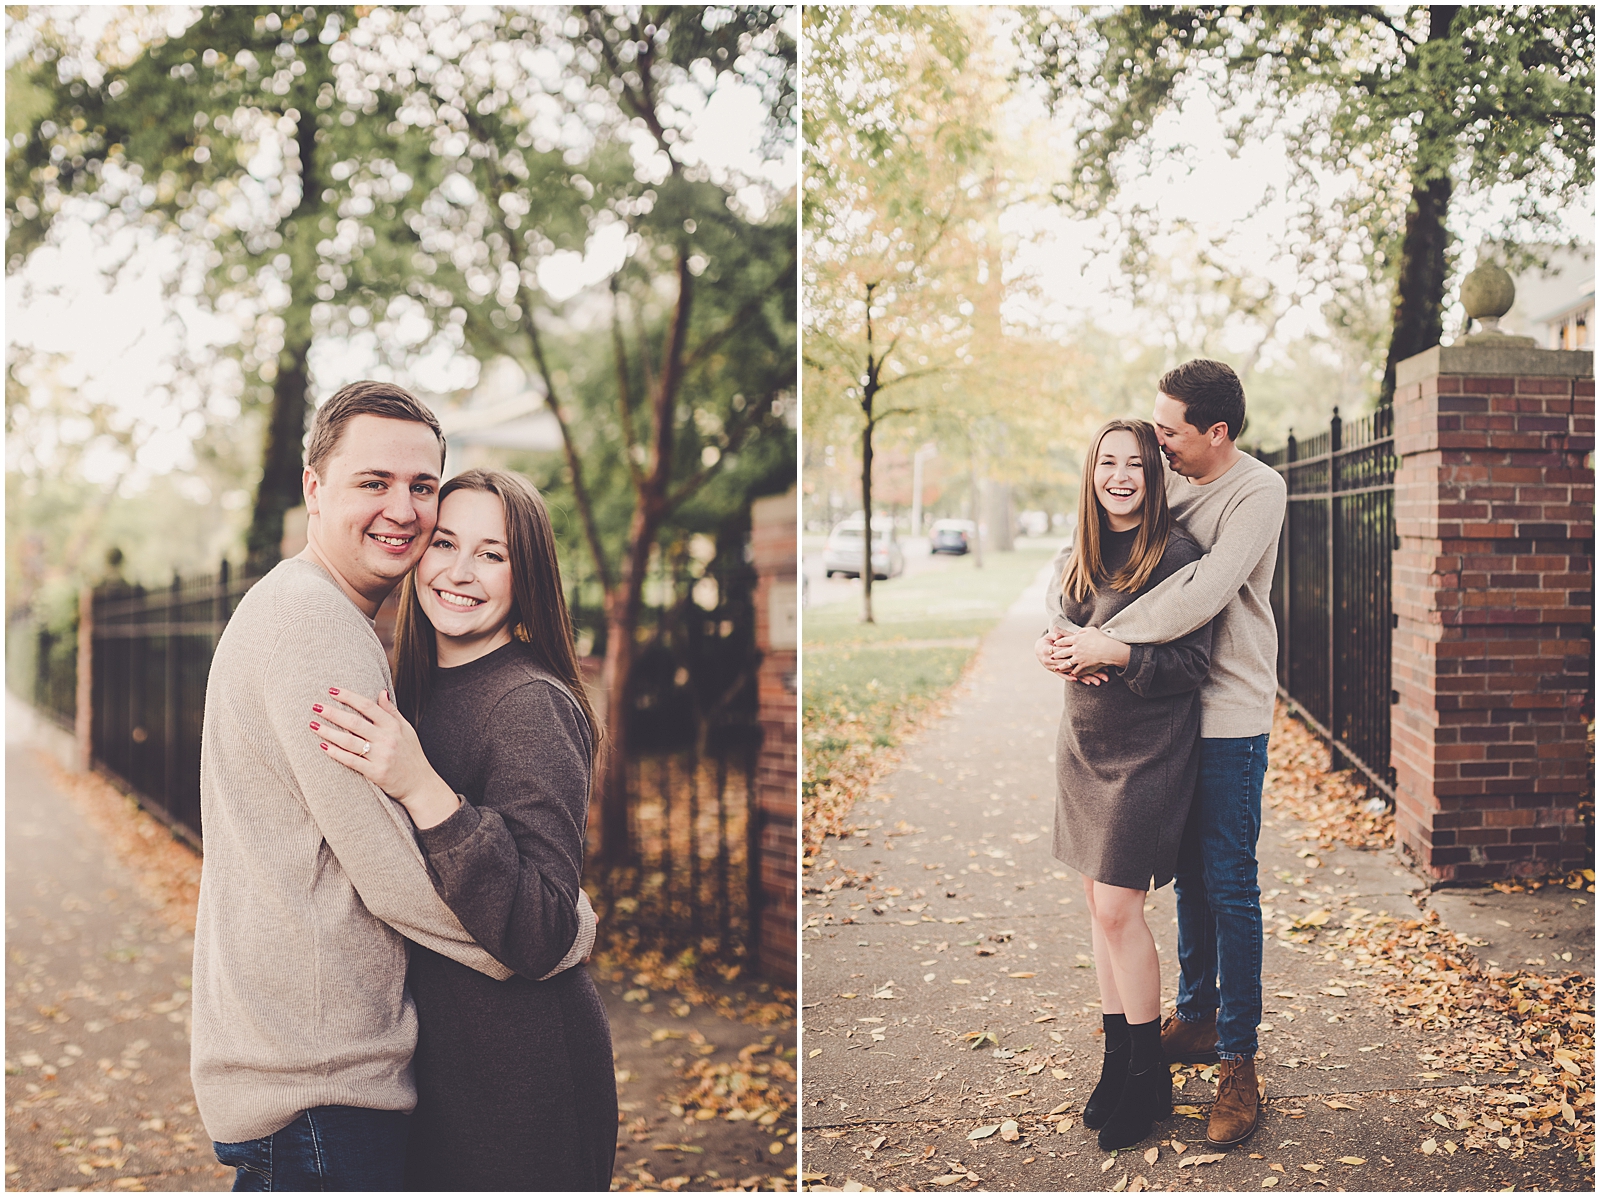 Natalie and Colin's fall Logan Square engagement photos in Chicago, Illinois with Chicagoland wedding photographer Kara Evans Photographer.